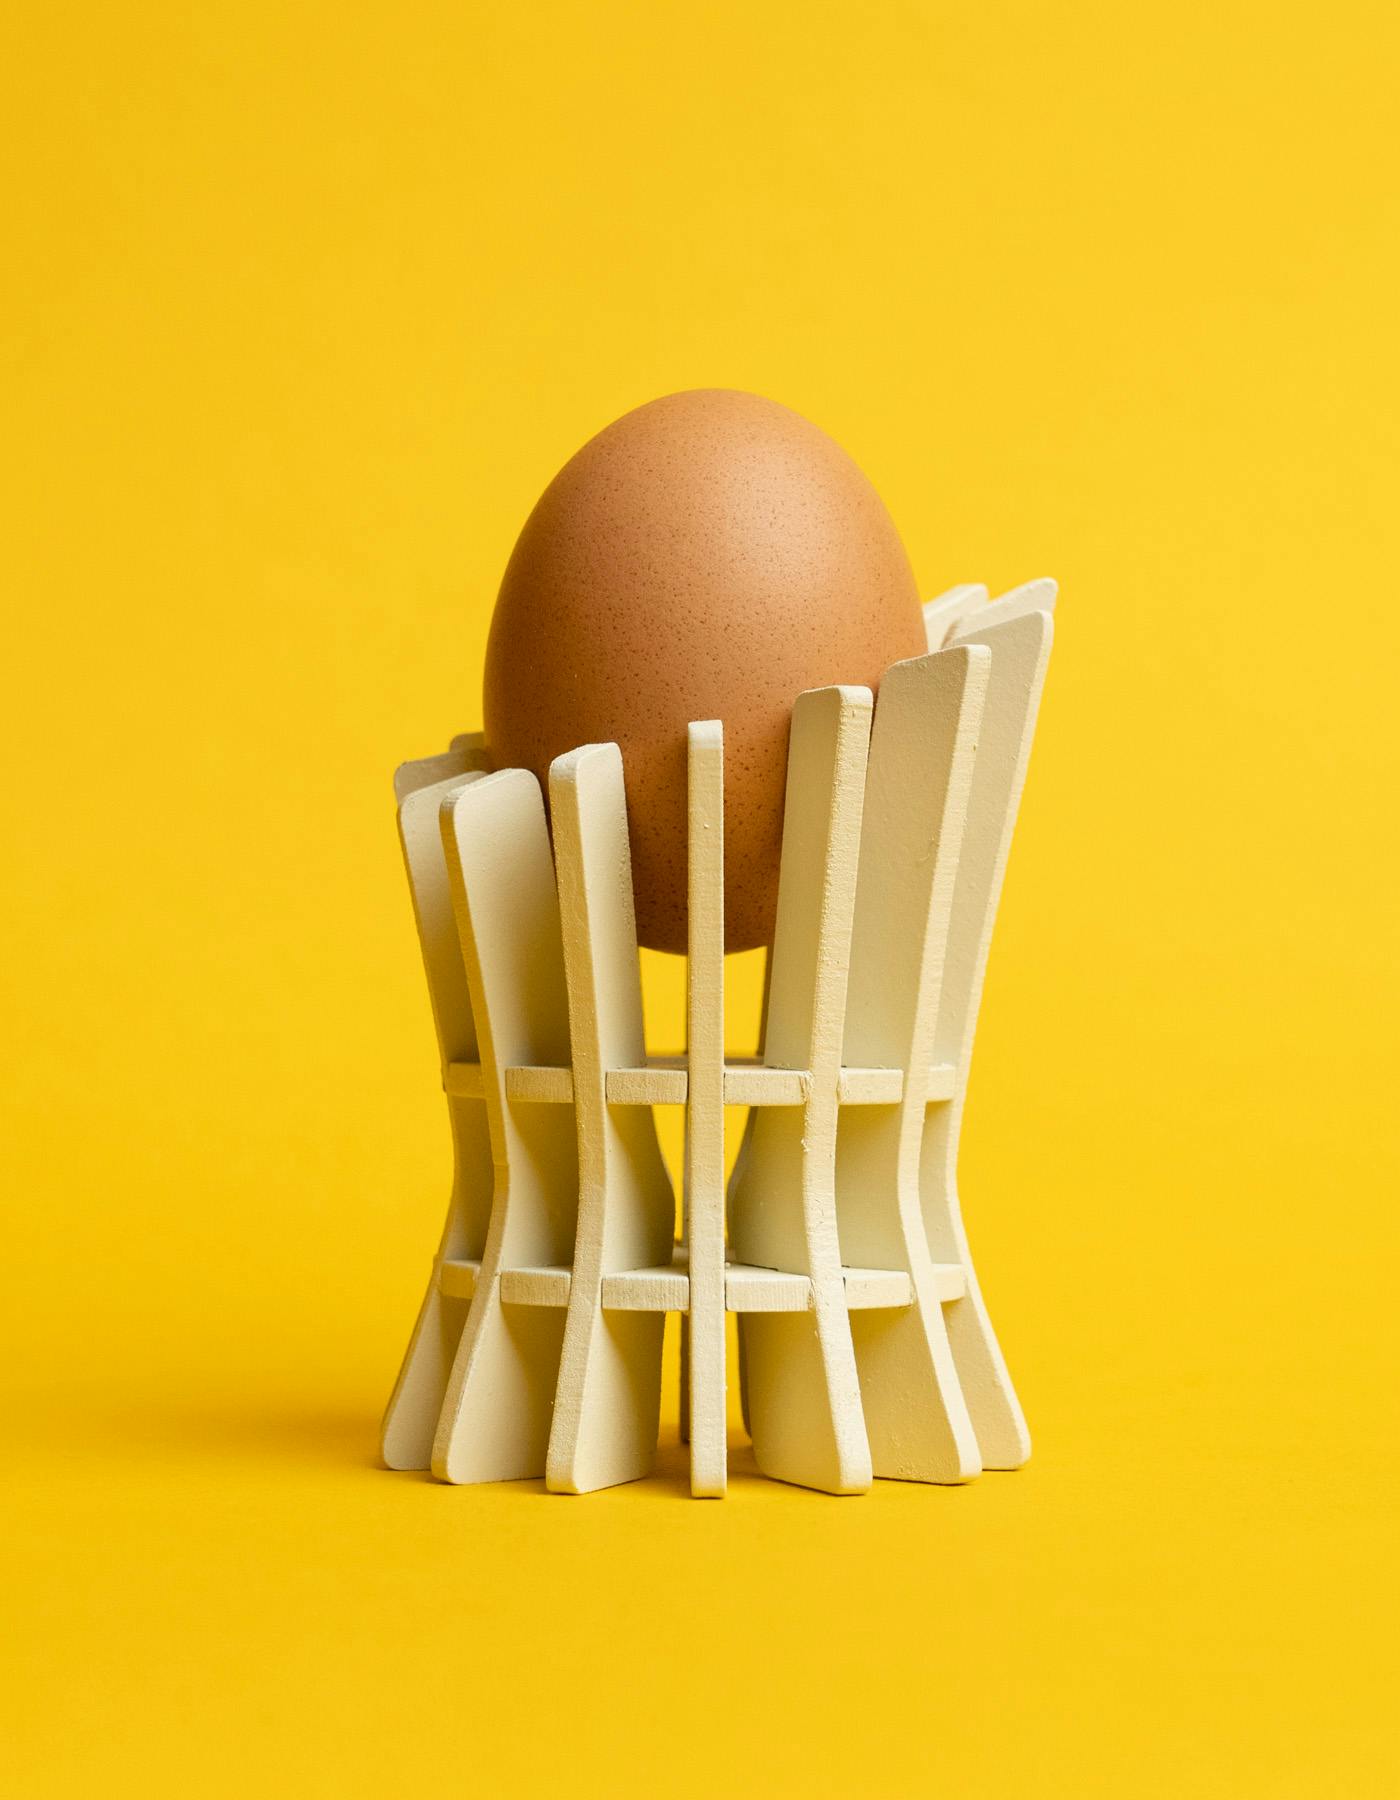 A white cylindrical fin loft model holding up an egg against a bright yellow background.